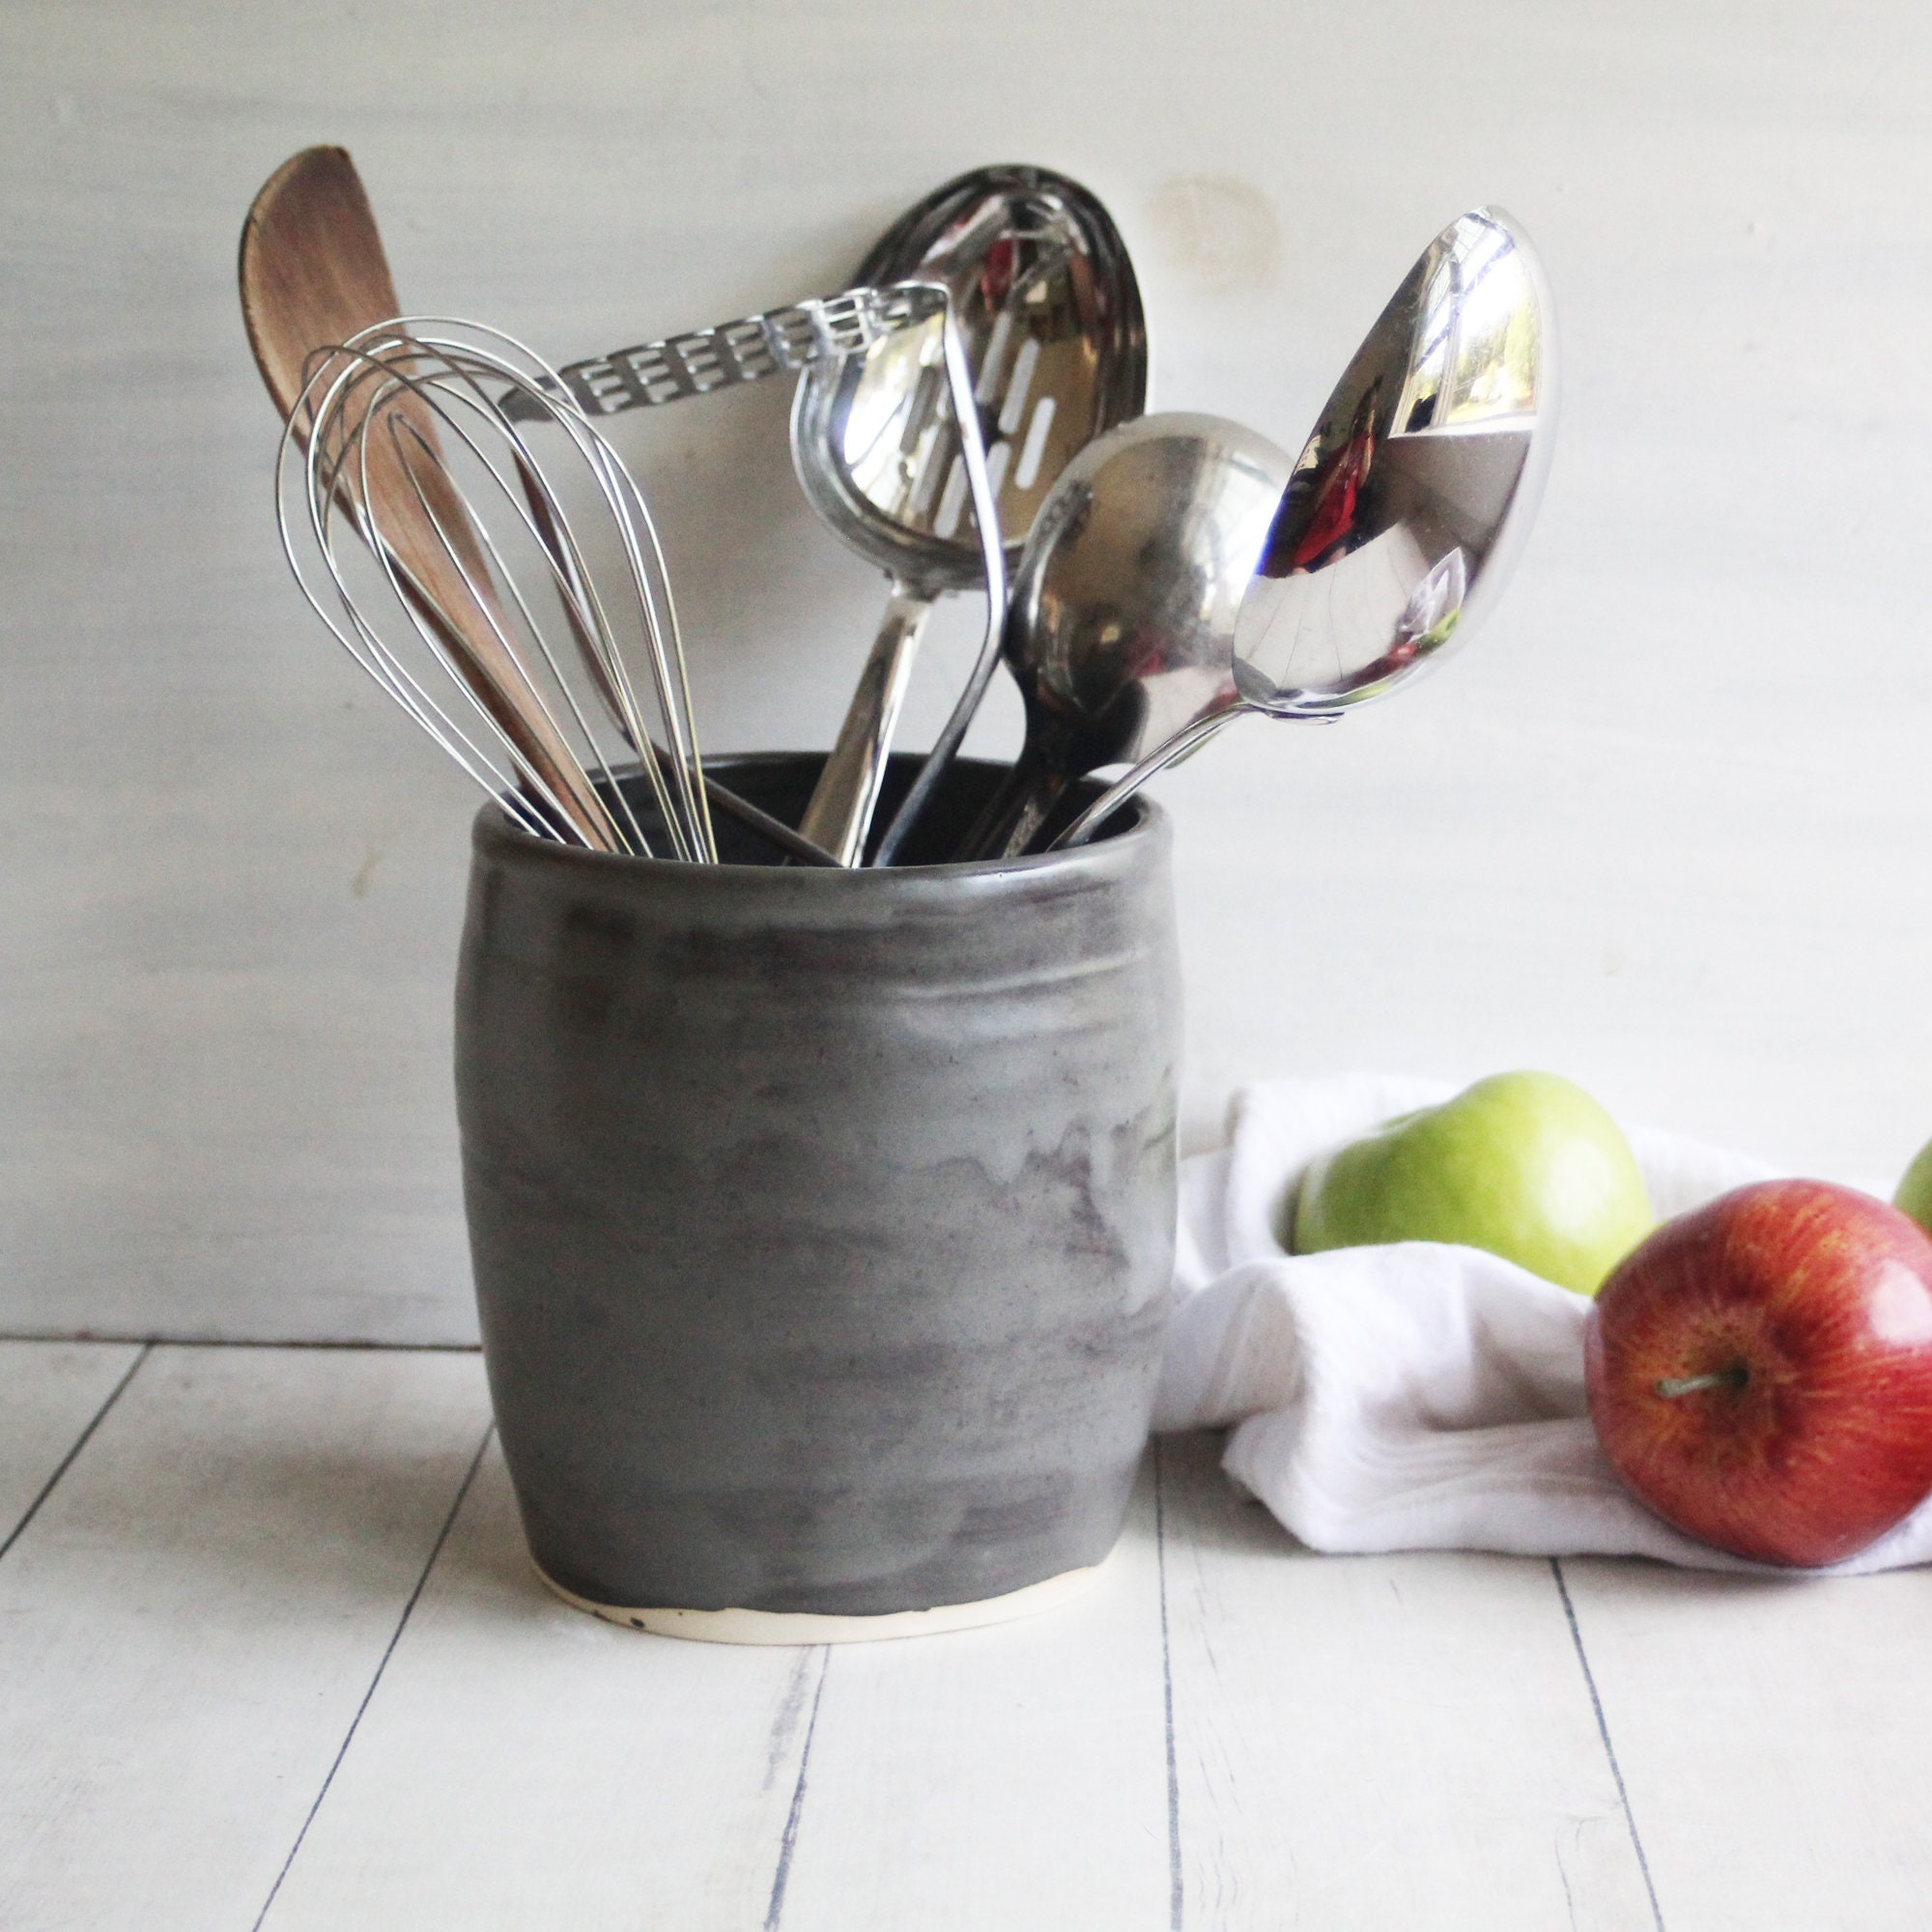 Extra Large Rotating Utensil Holder Caddy with Sturdy No-Tip